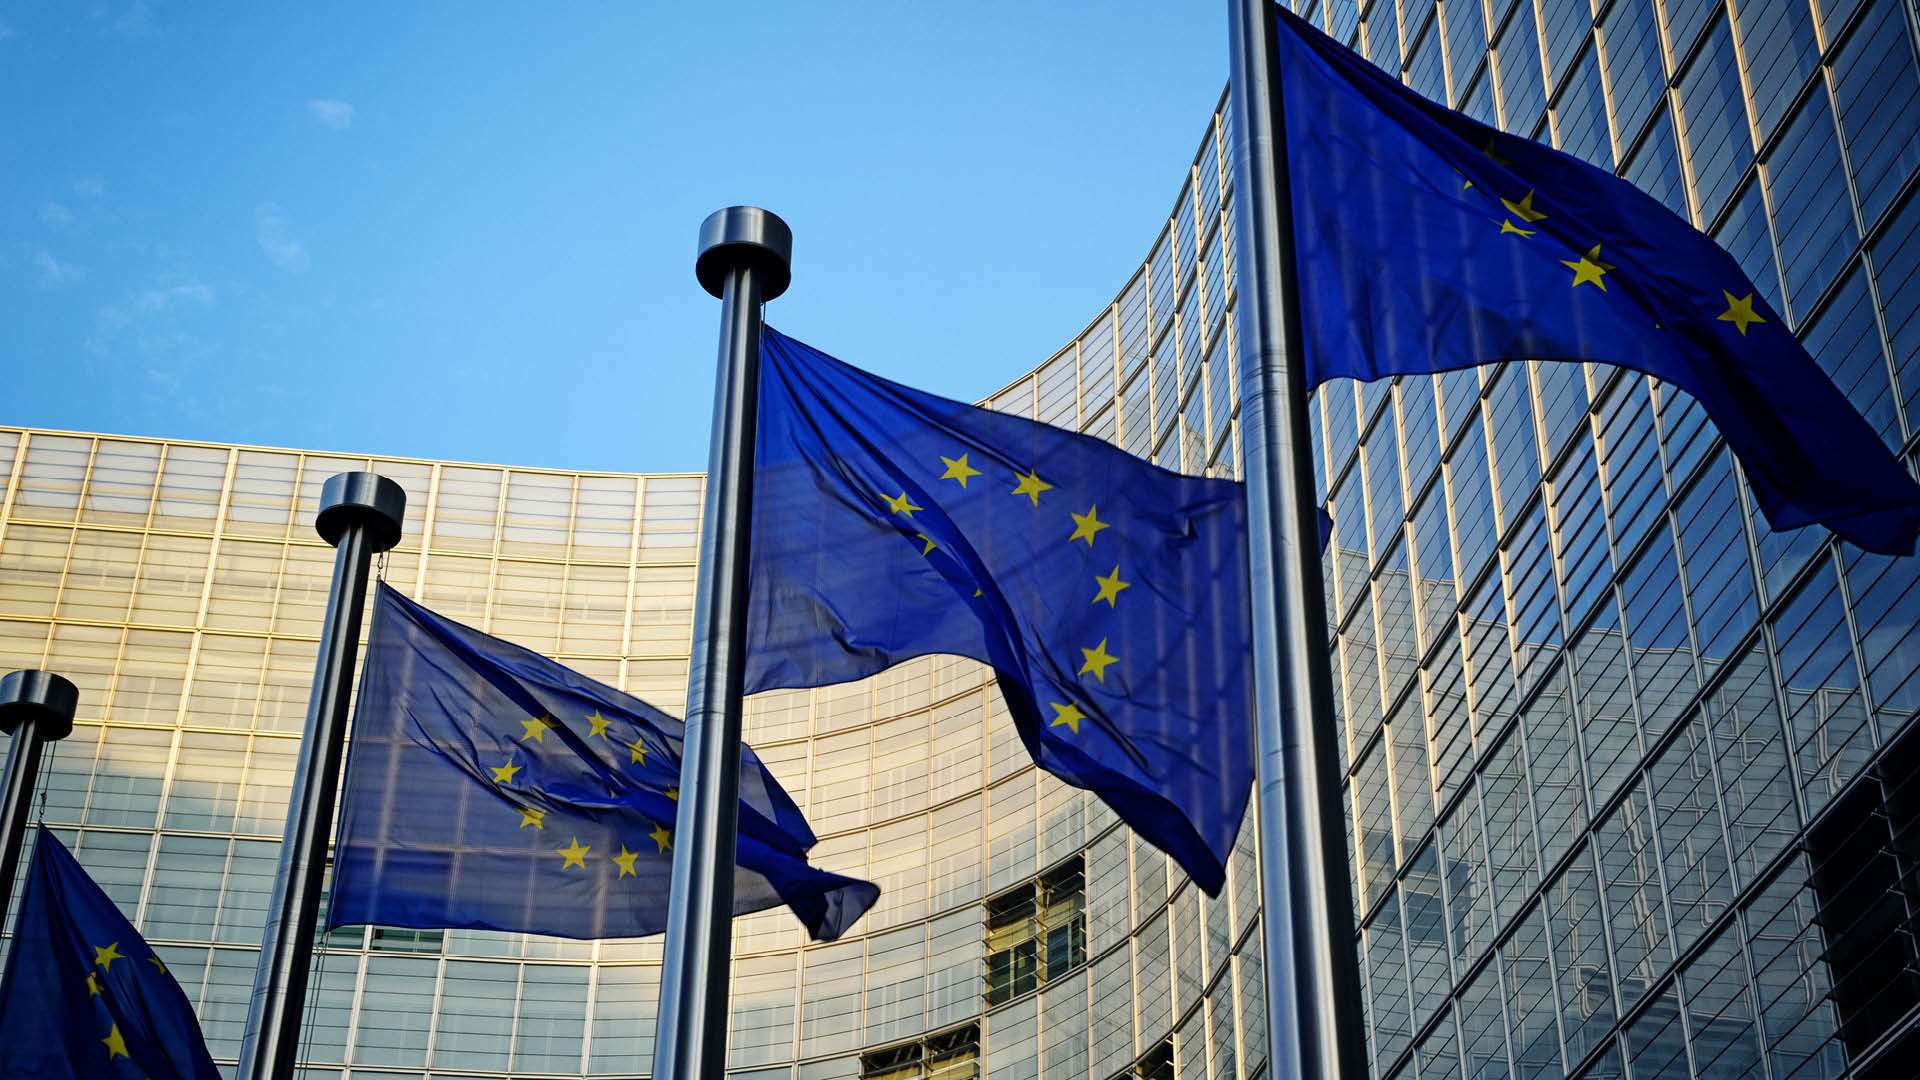 European commission considers new civil liability rules for the digital age and artificial intelligence